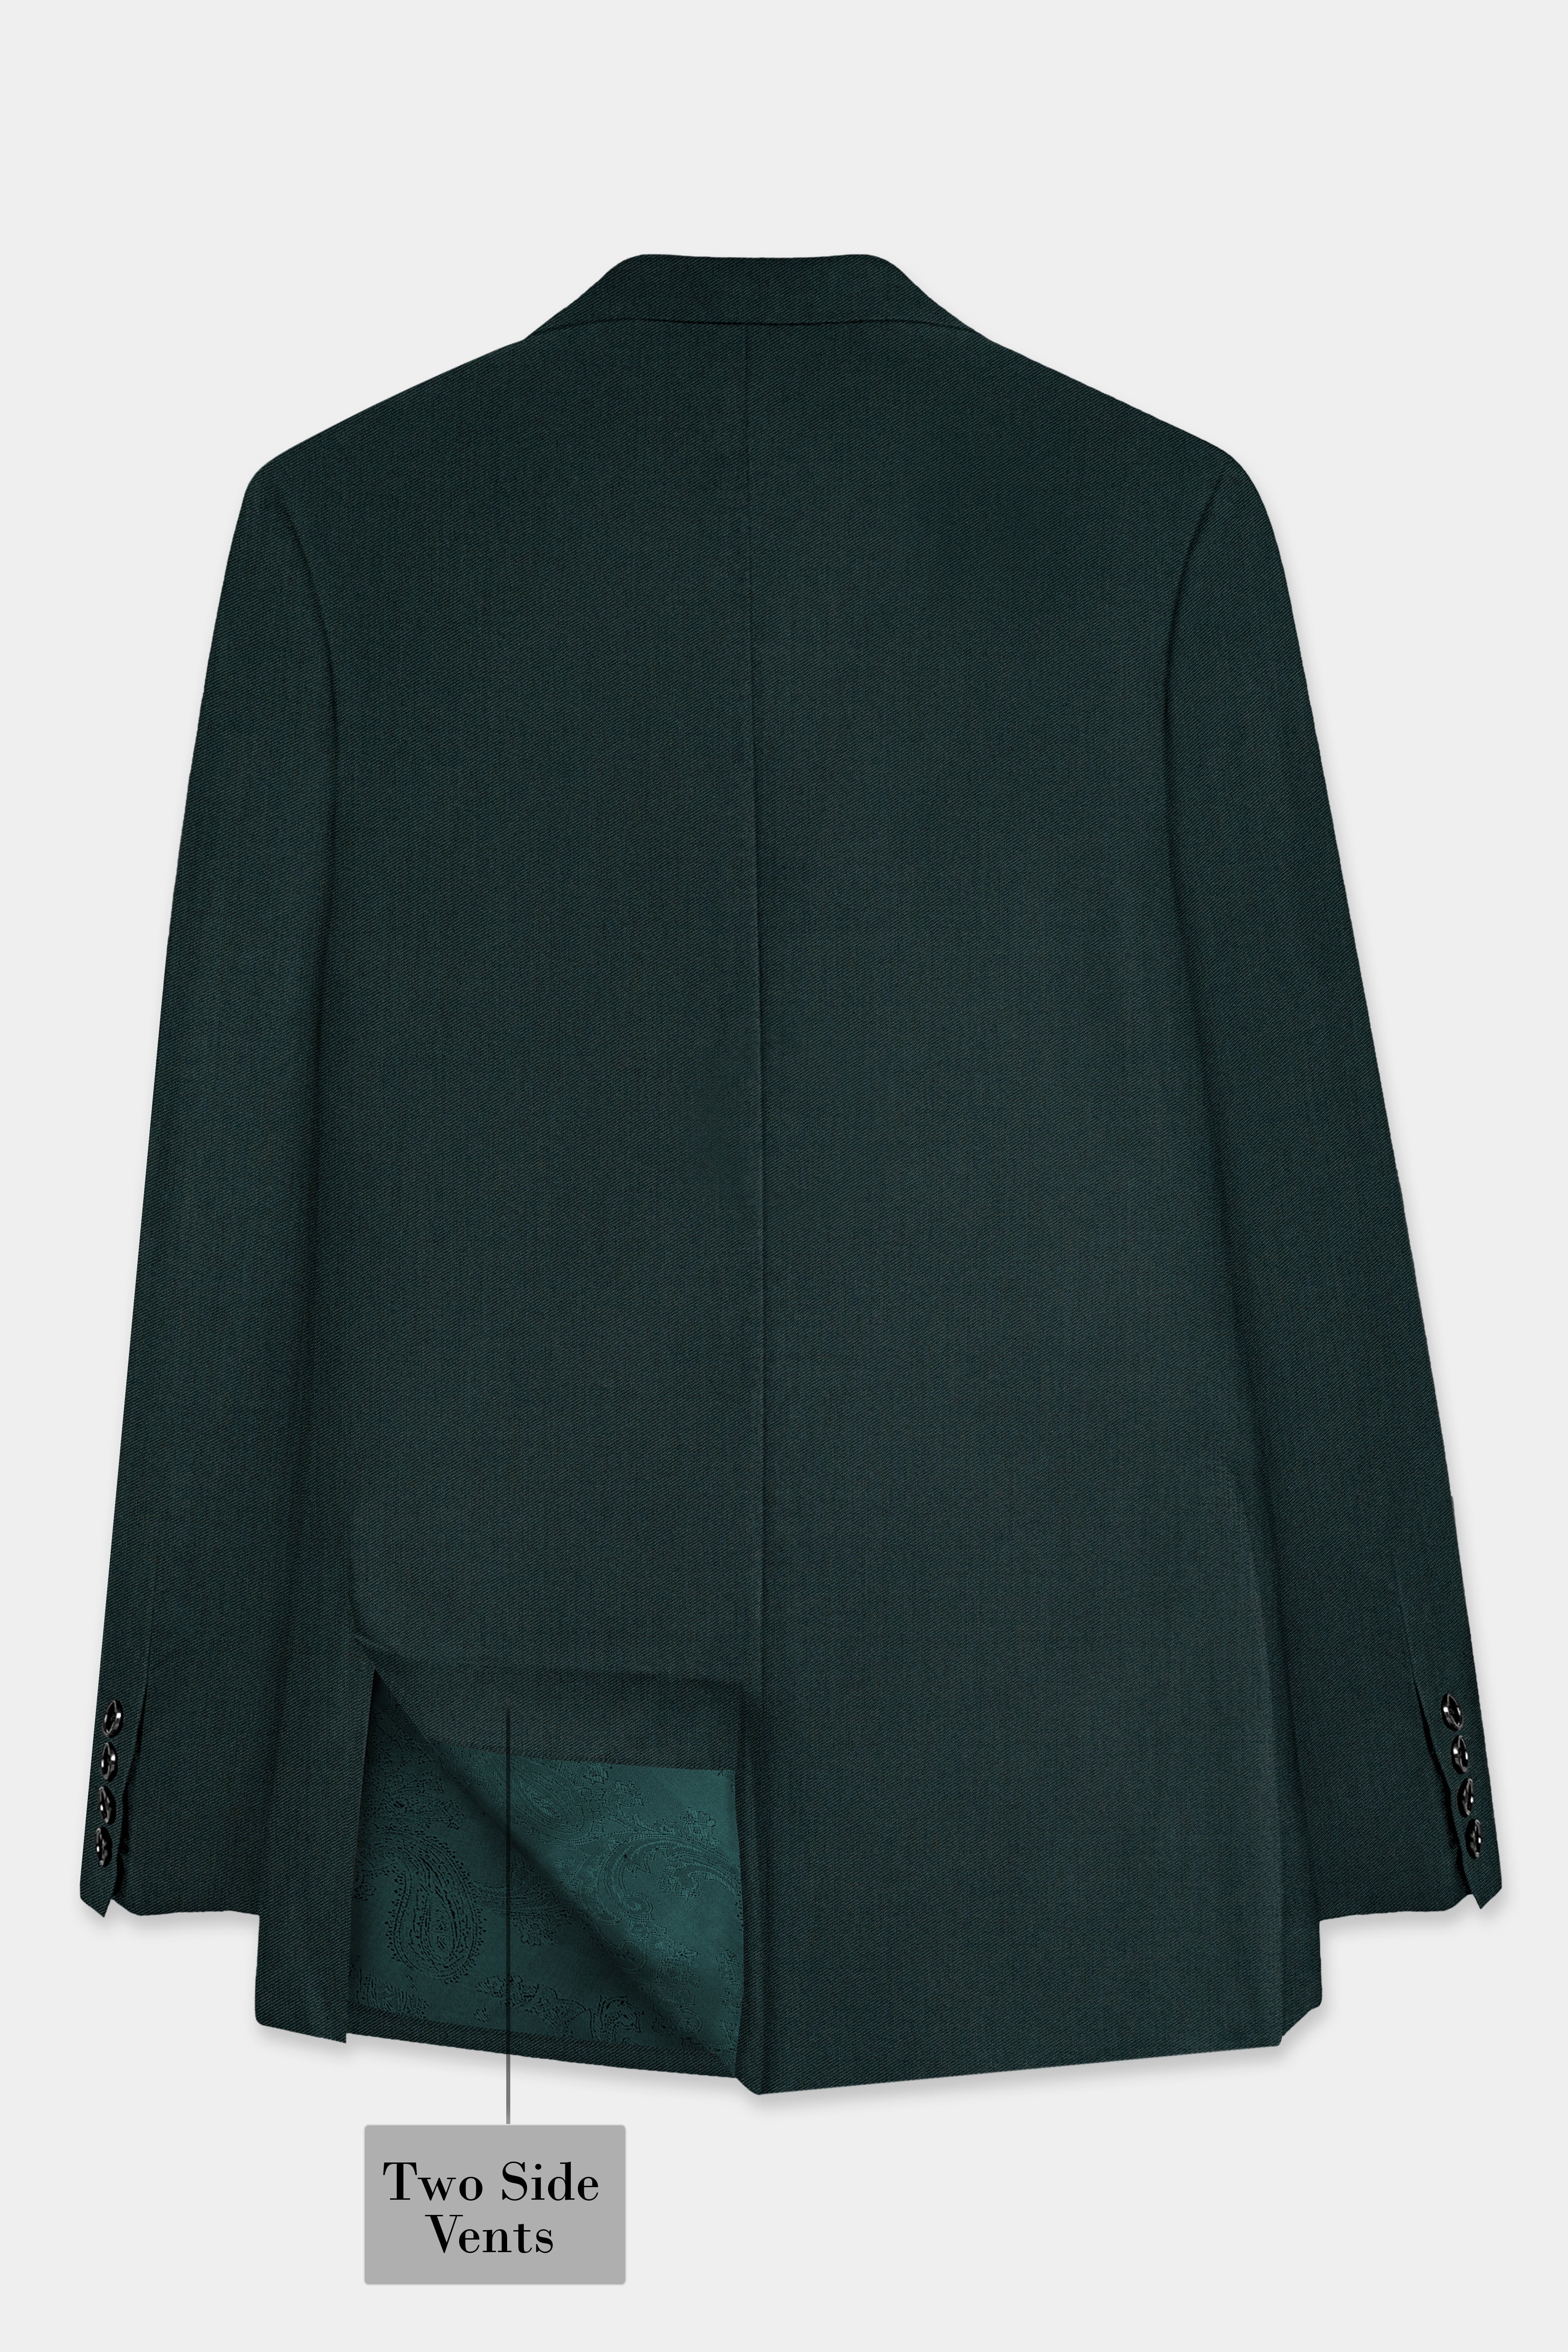 Timber Green Wool Rich Double Breasted Suit